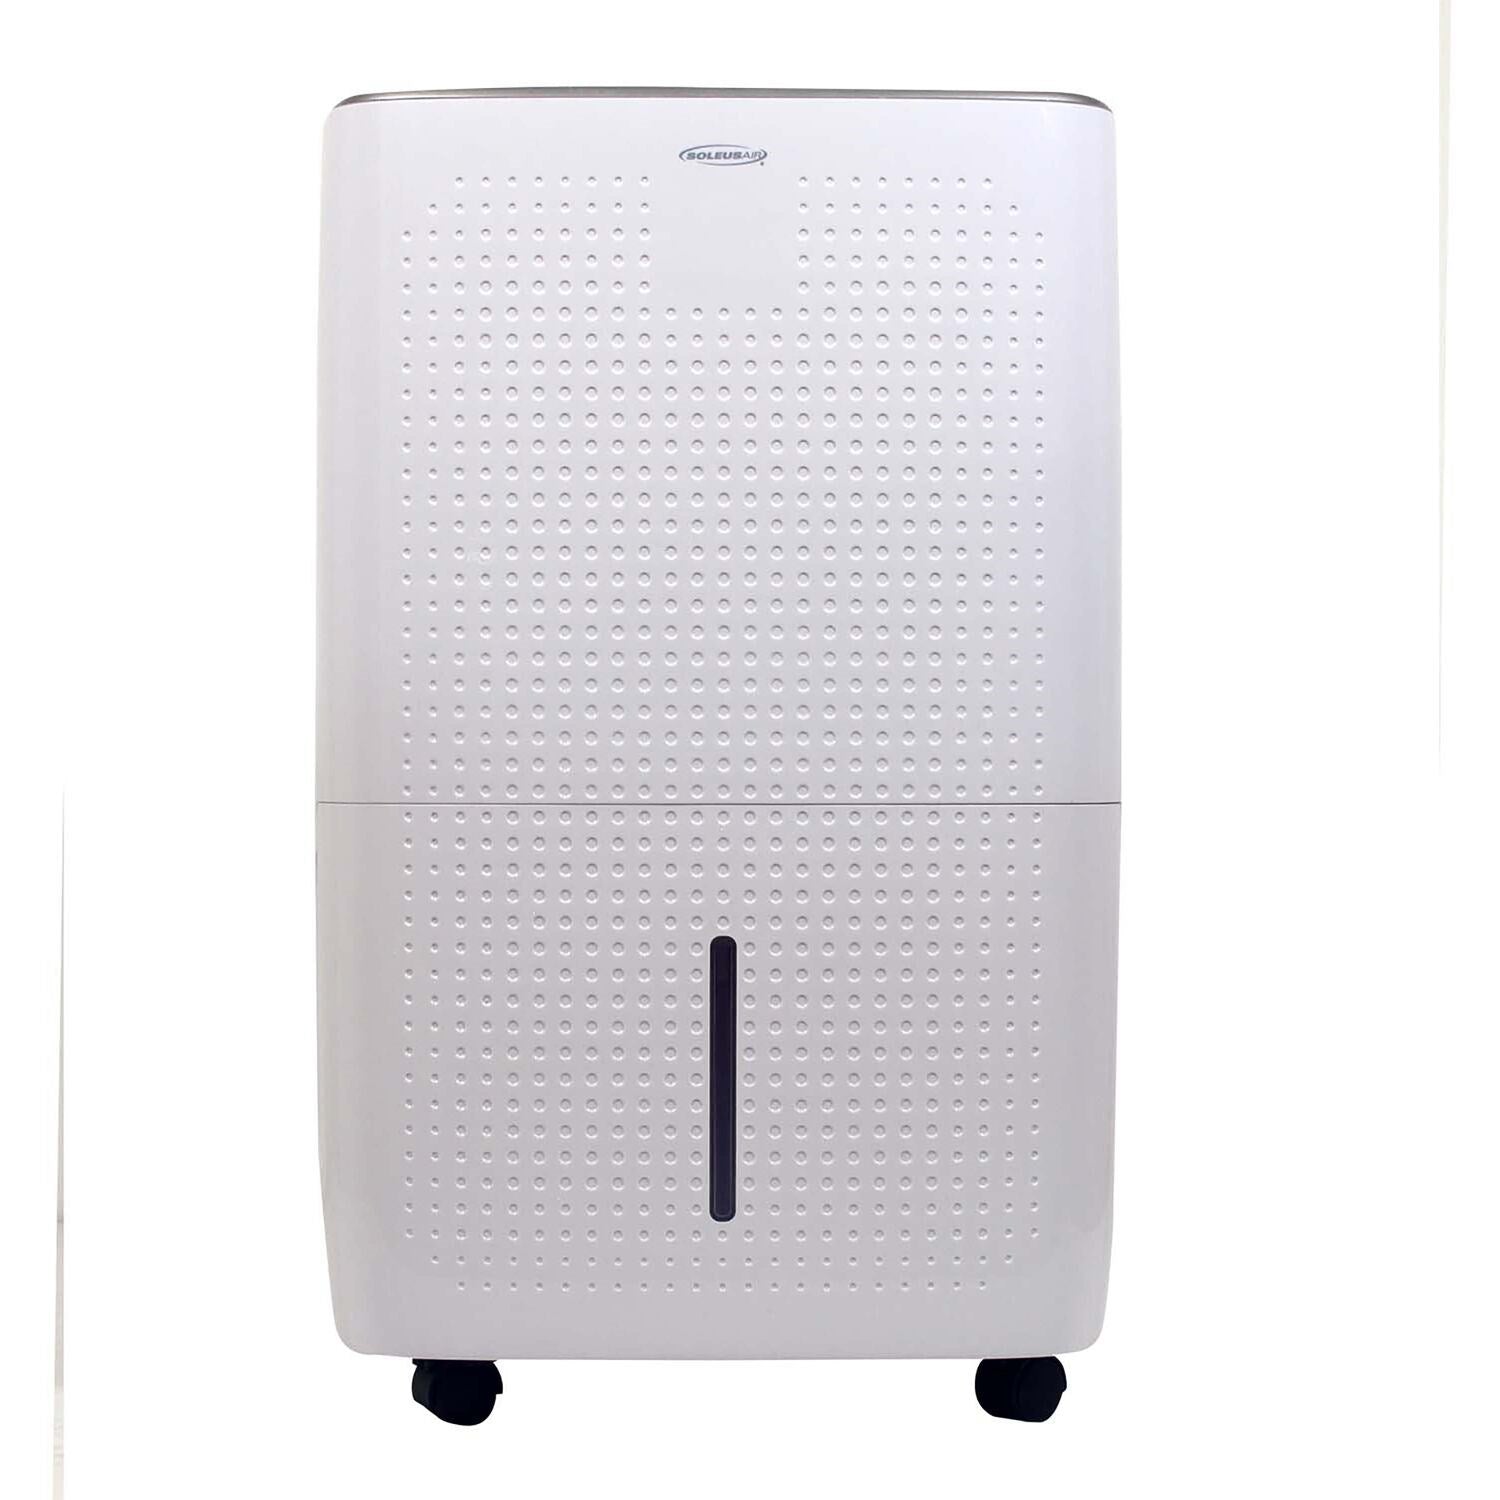 Soleus AC 50-Pint Energy Star Rated Dehumidifier with Automatic Pump, Mirage Display and Tri-Pat Safety Technology